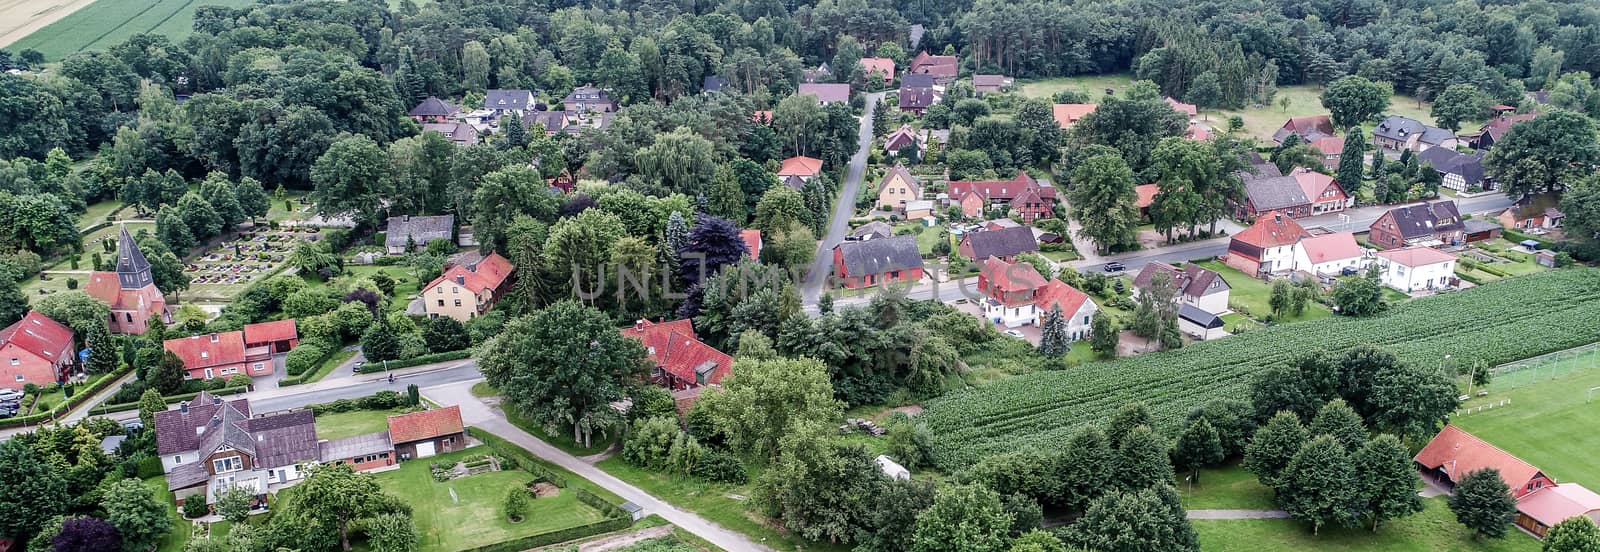 Shot from the air of a village, Ahnsen, Lower Saxony, Germany